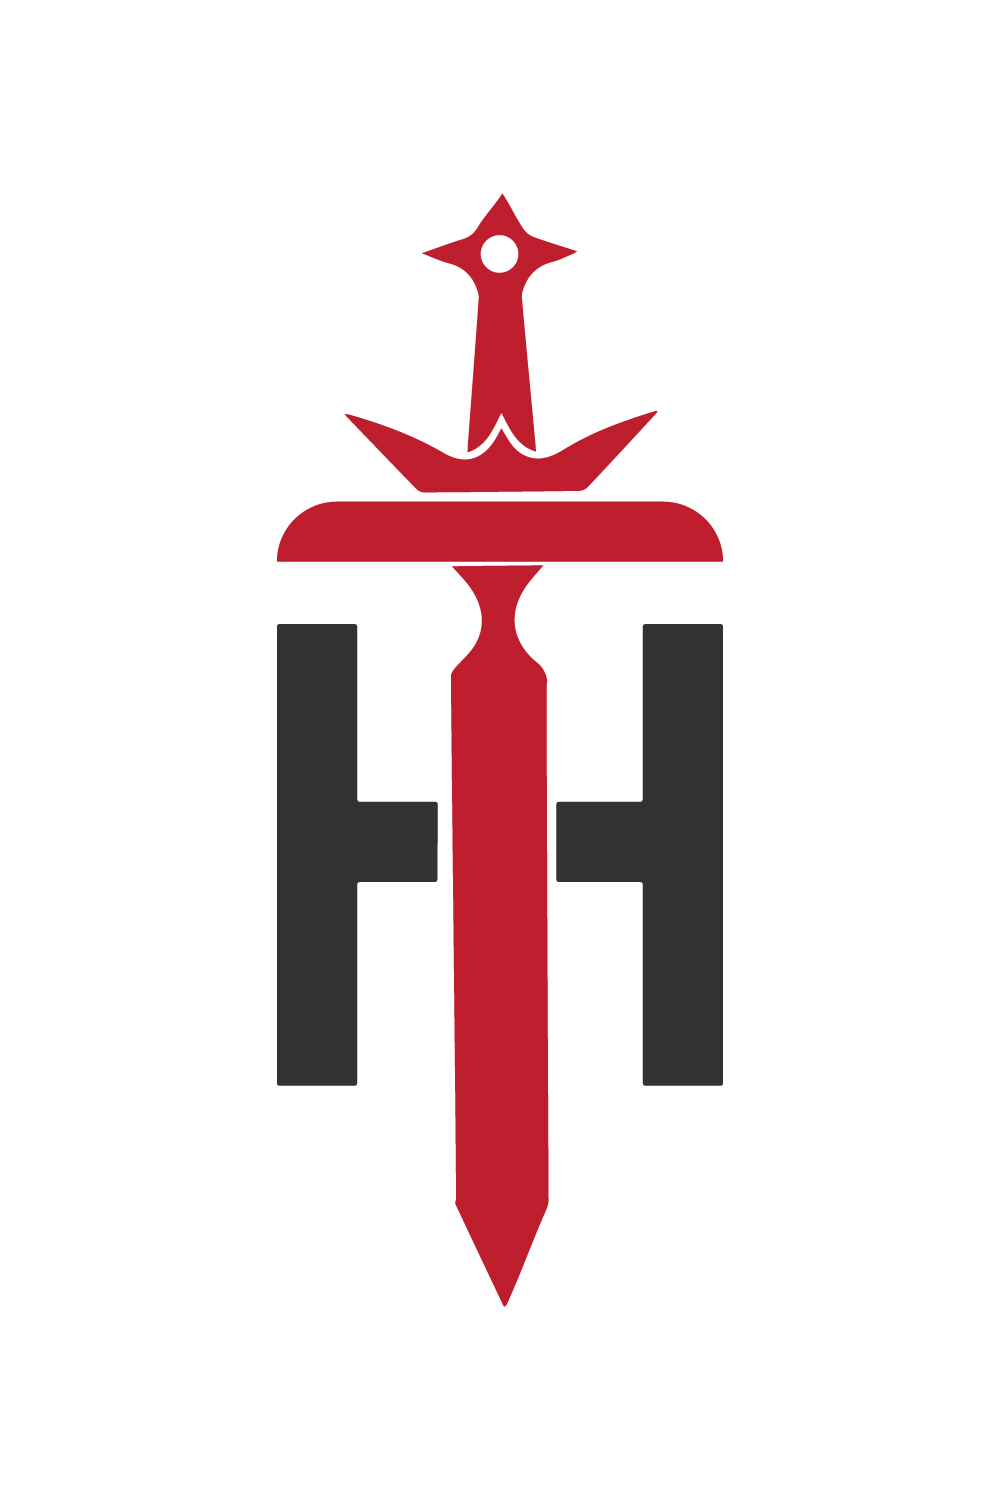 Initials H letters logo design vector images H logo red and black color The Sword logo design The Sword H logo best company identity pinterest preview image.